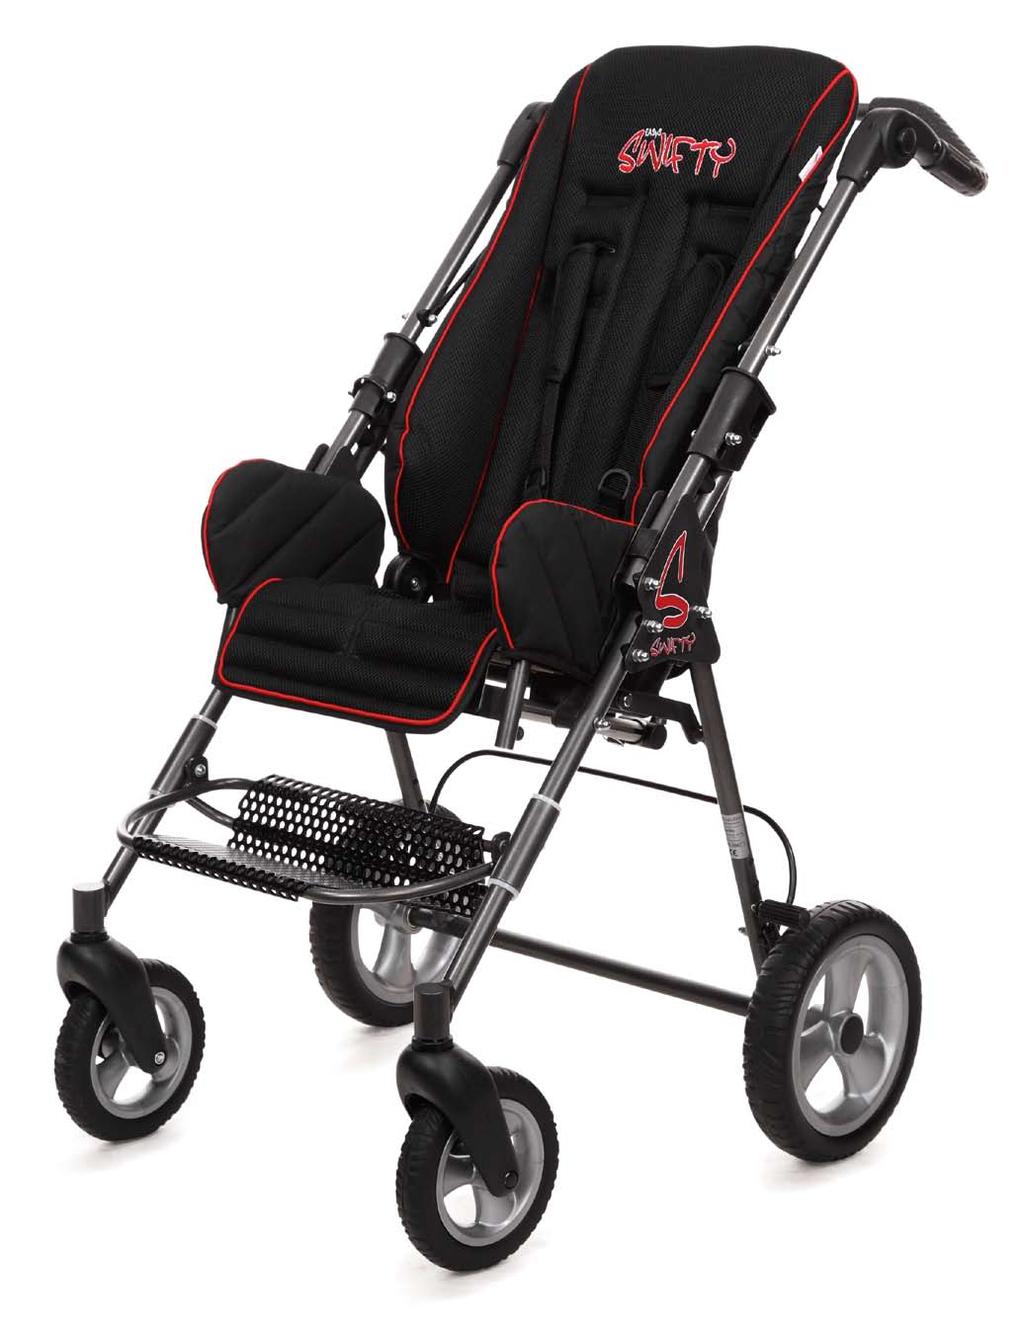 The lightweight stroller easy folding and quick transport